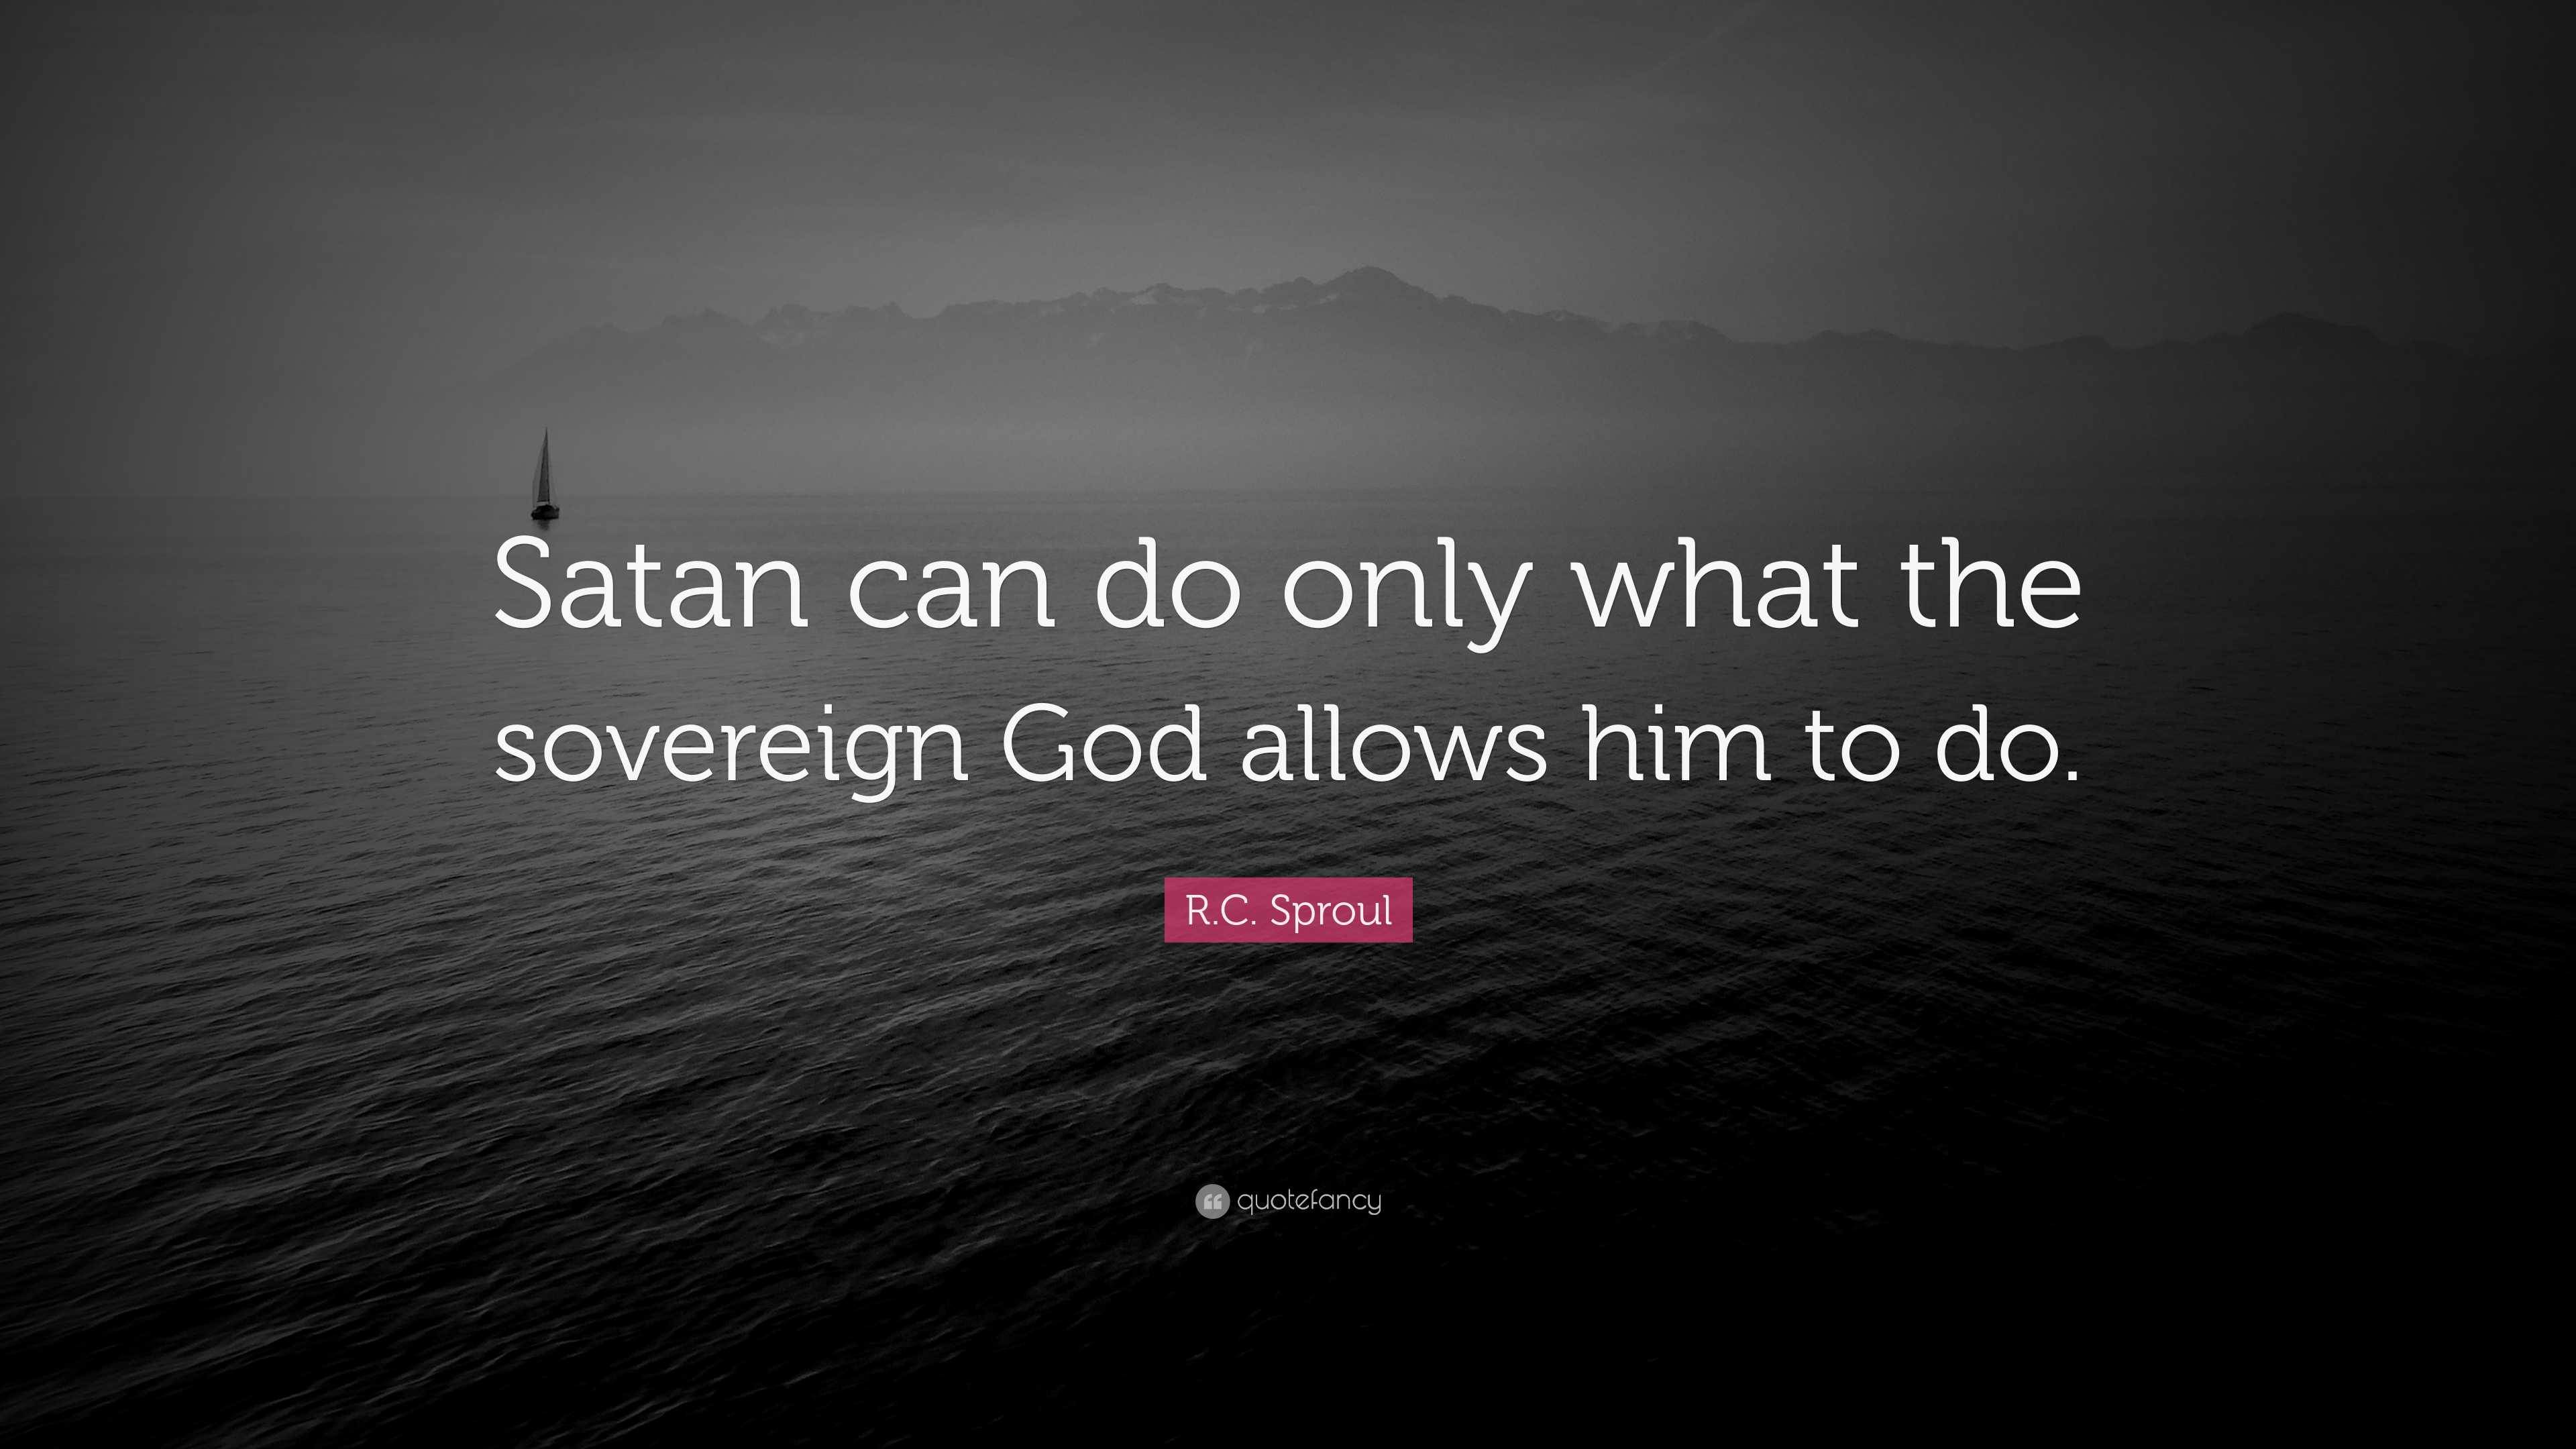 https://quotefancy.com/media/wallpaper/3840x2160/7954007-R-C-Sproul-Quote-Satan-can-do-only-what-the-sovereign-God-allows.jpg